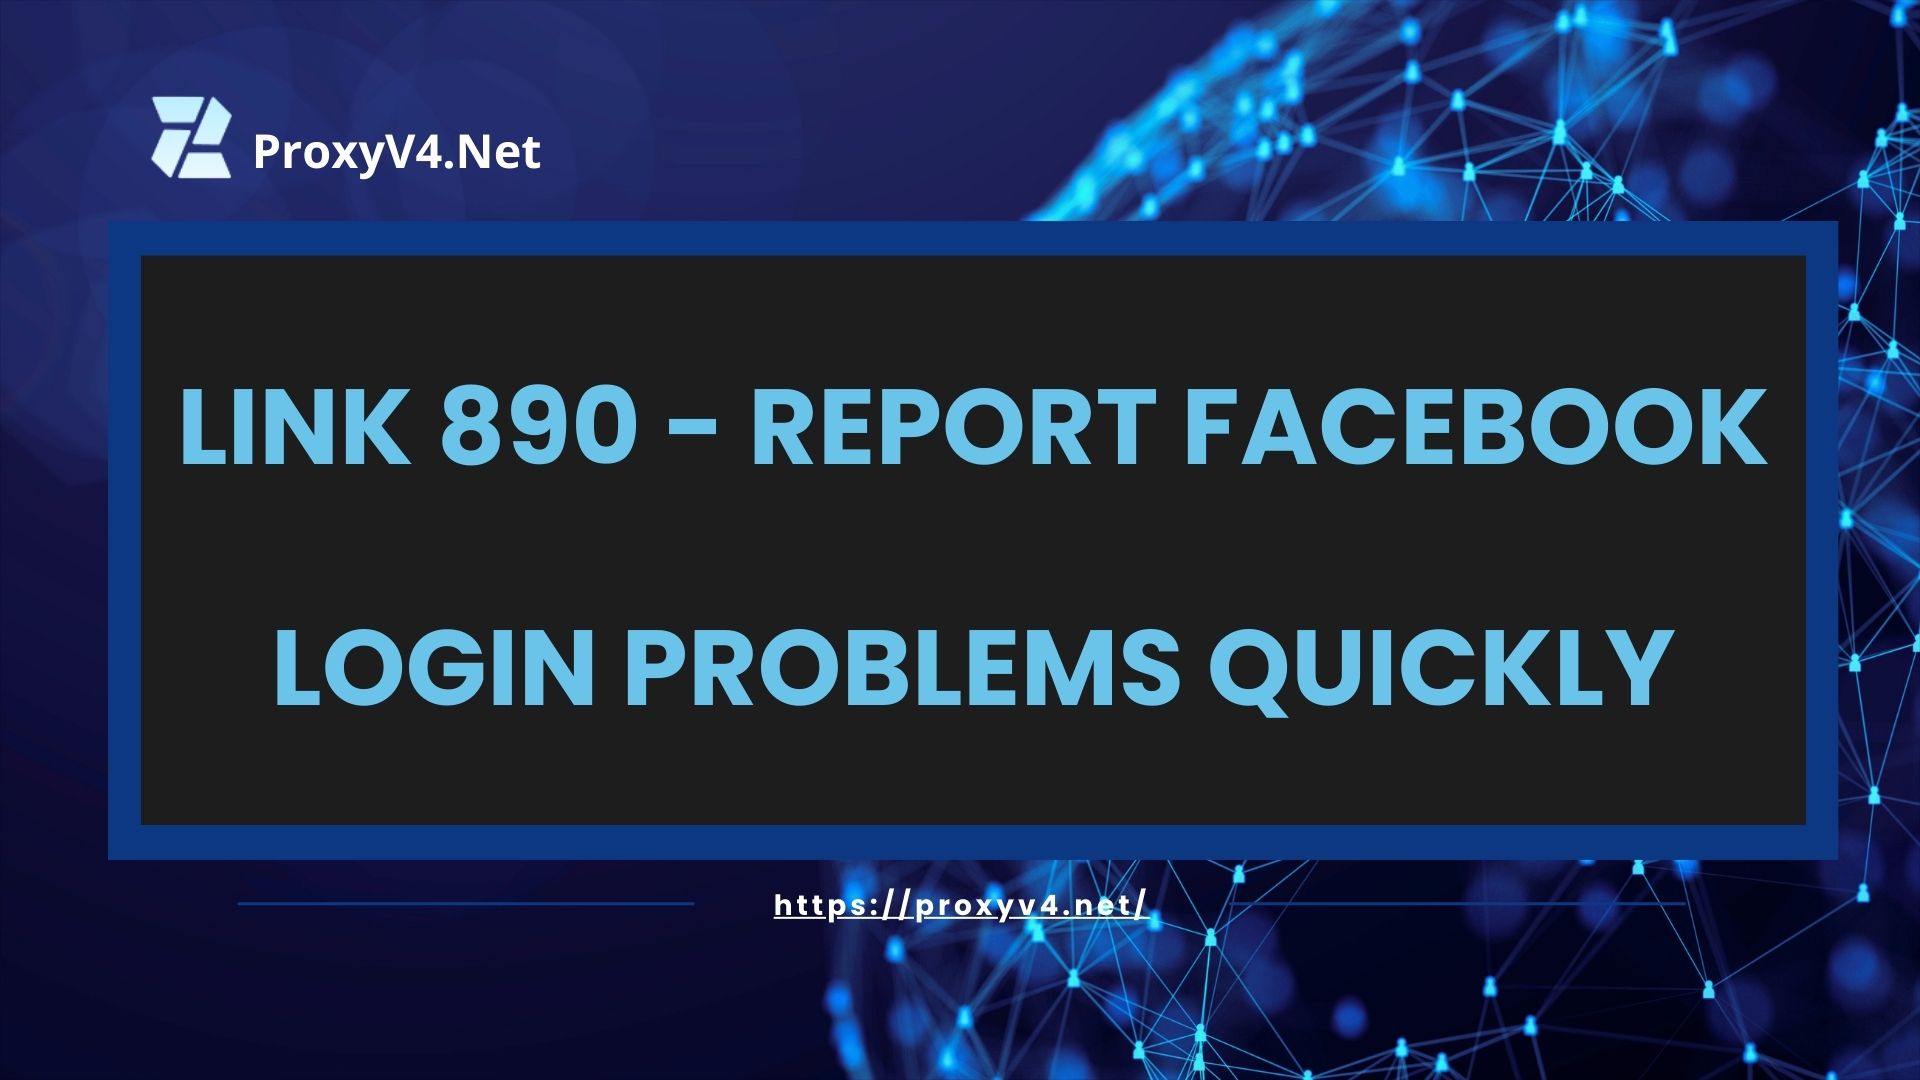 Link 890 - Report Facebook login problems quickly